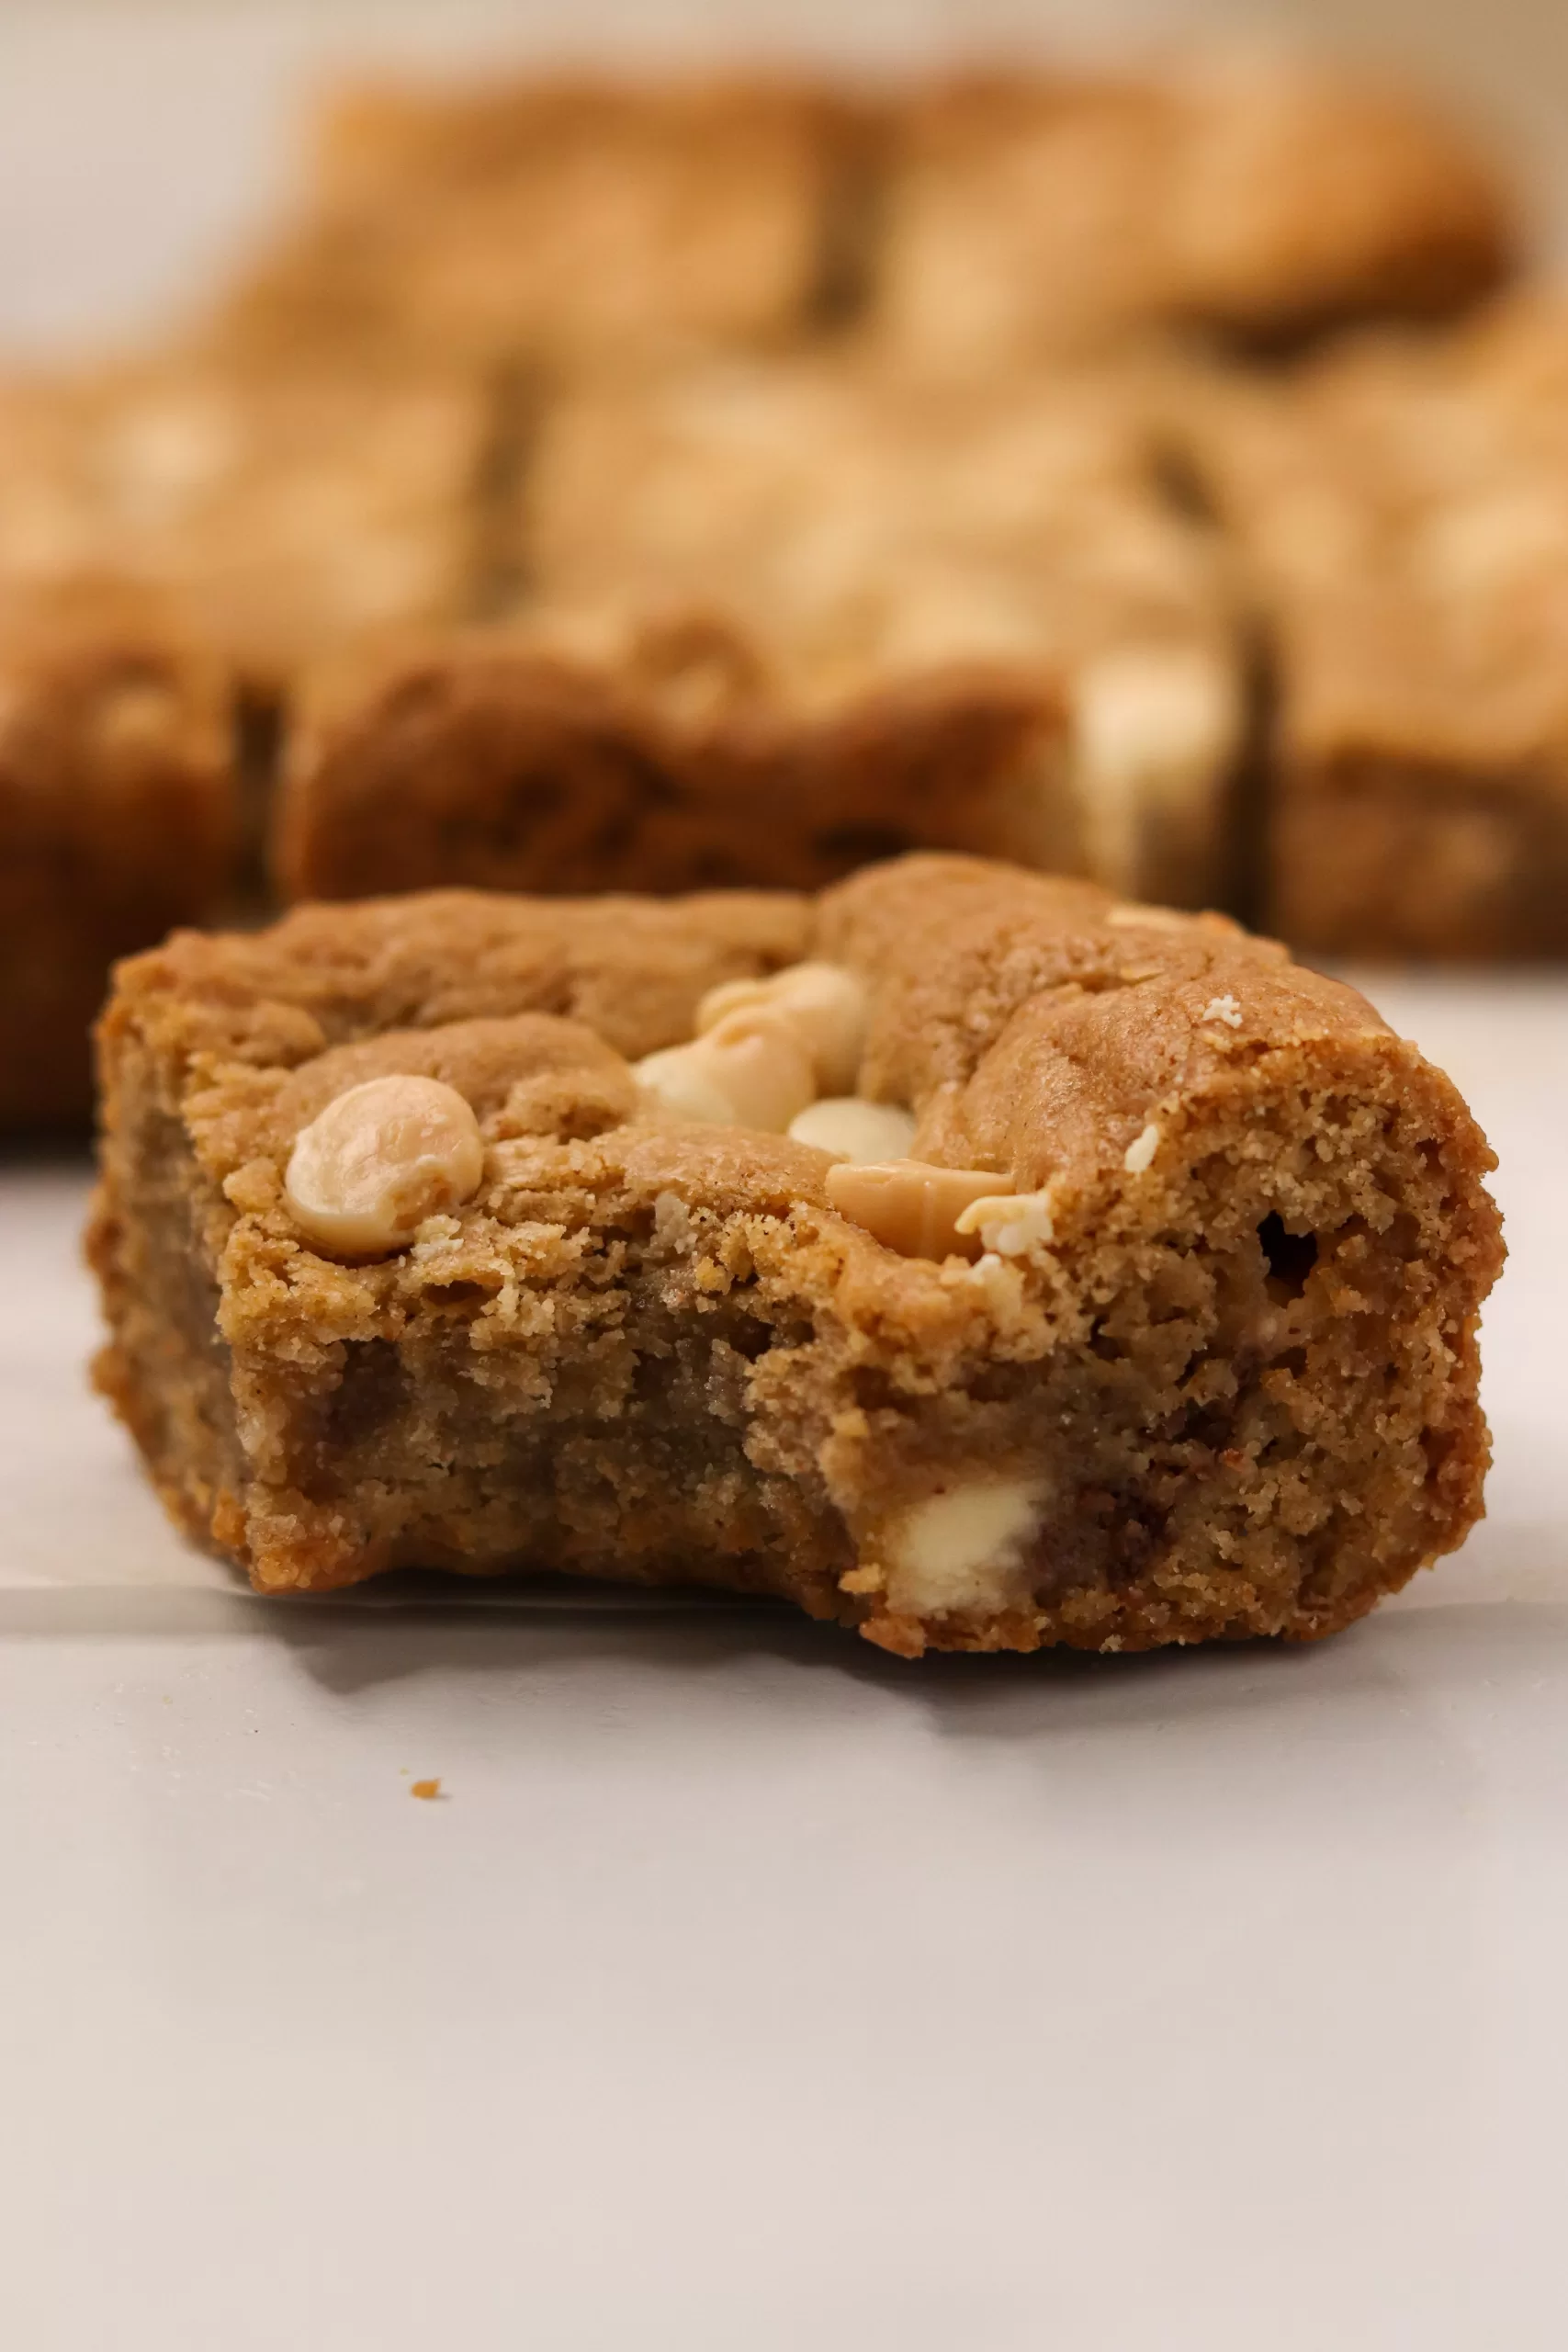 A white chocolate eggnog cookie bar with a bite taken out of it to show the chewy texture.